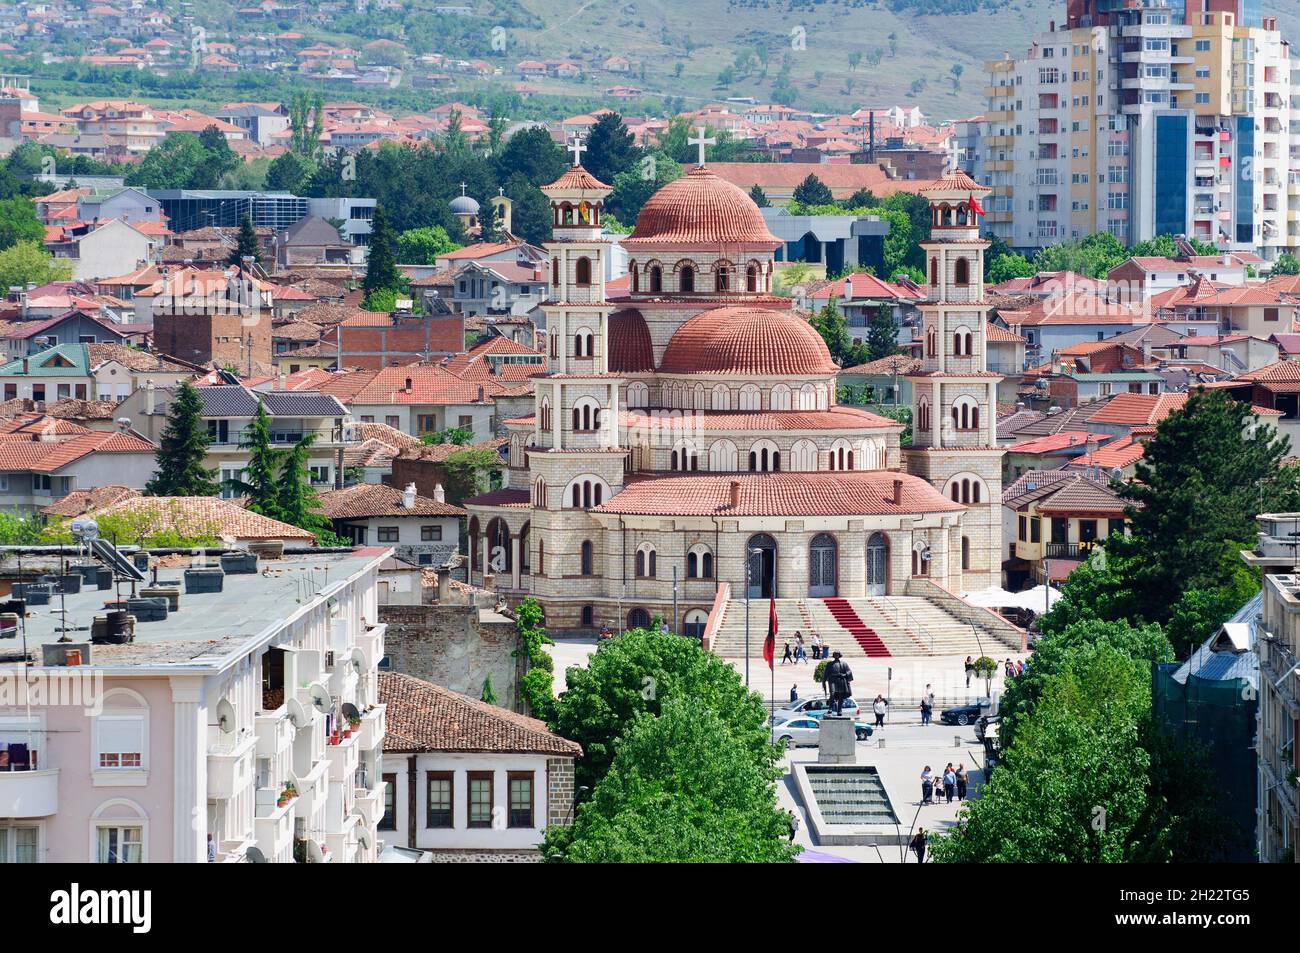 Resurrection Cathedral, View from Red Tower, City Centre, Korca, Korca, Albania Stock Photo